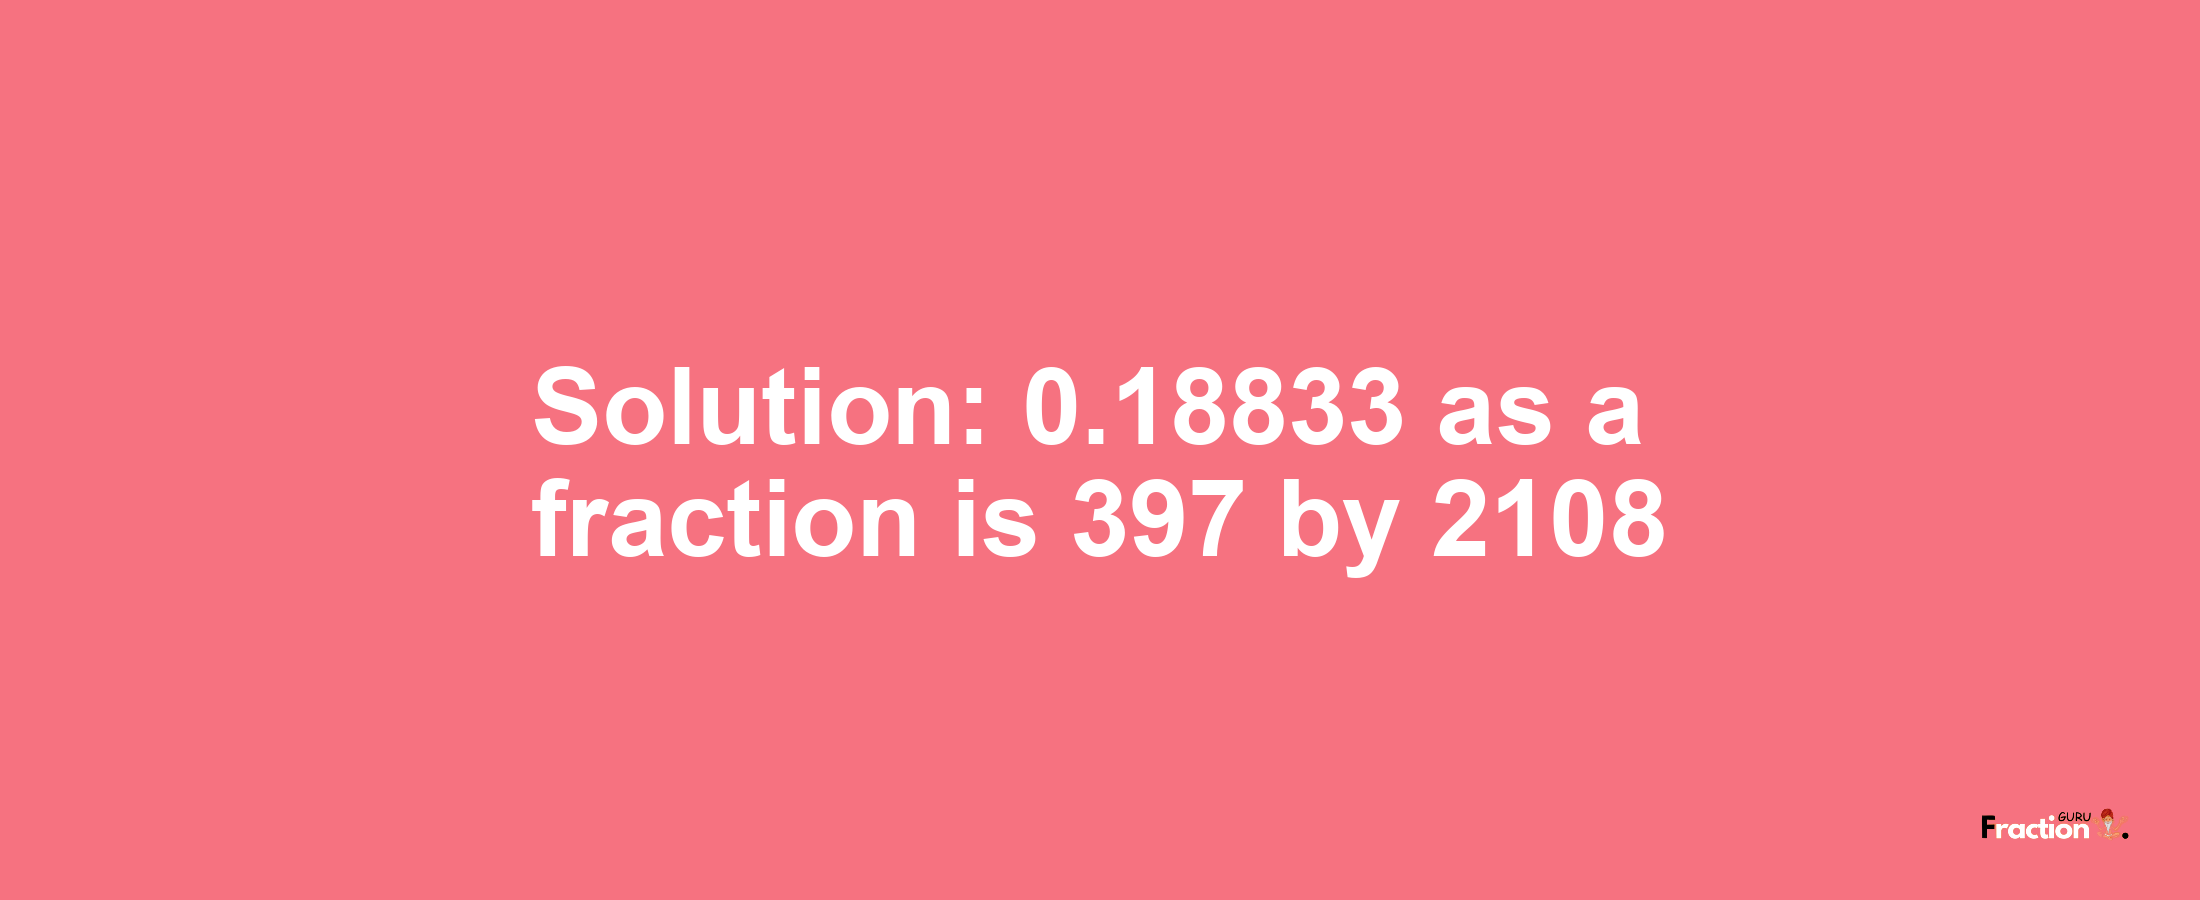 Solution:0.18833 as a fraction is 397/2108